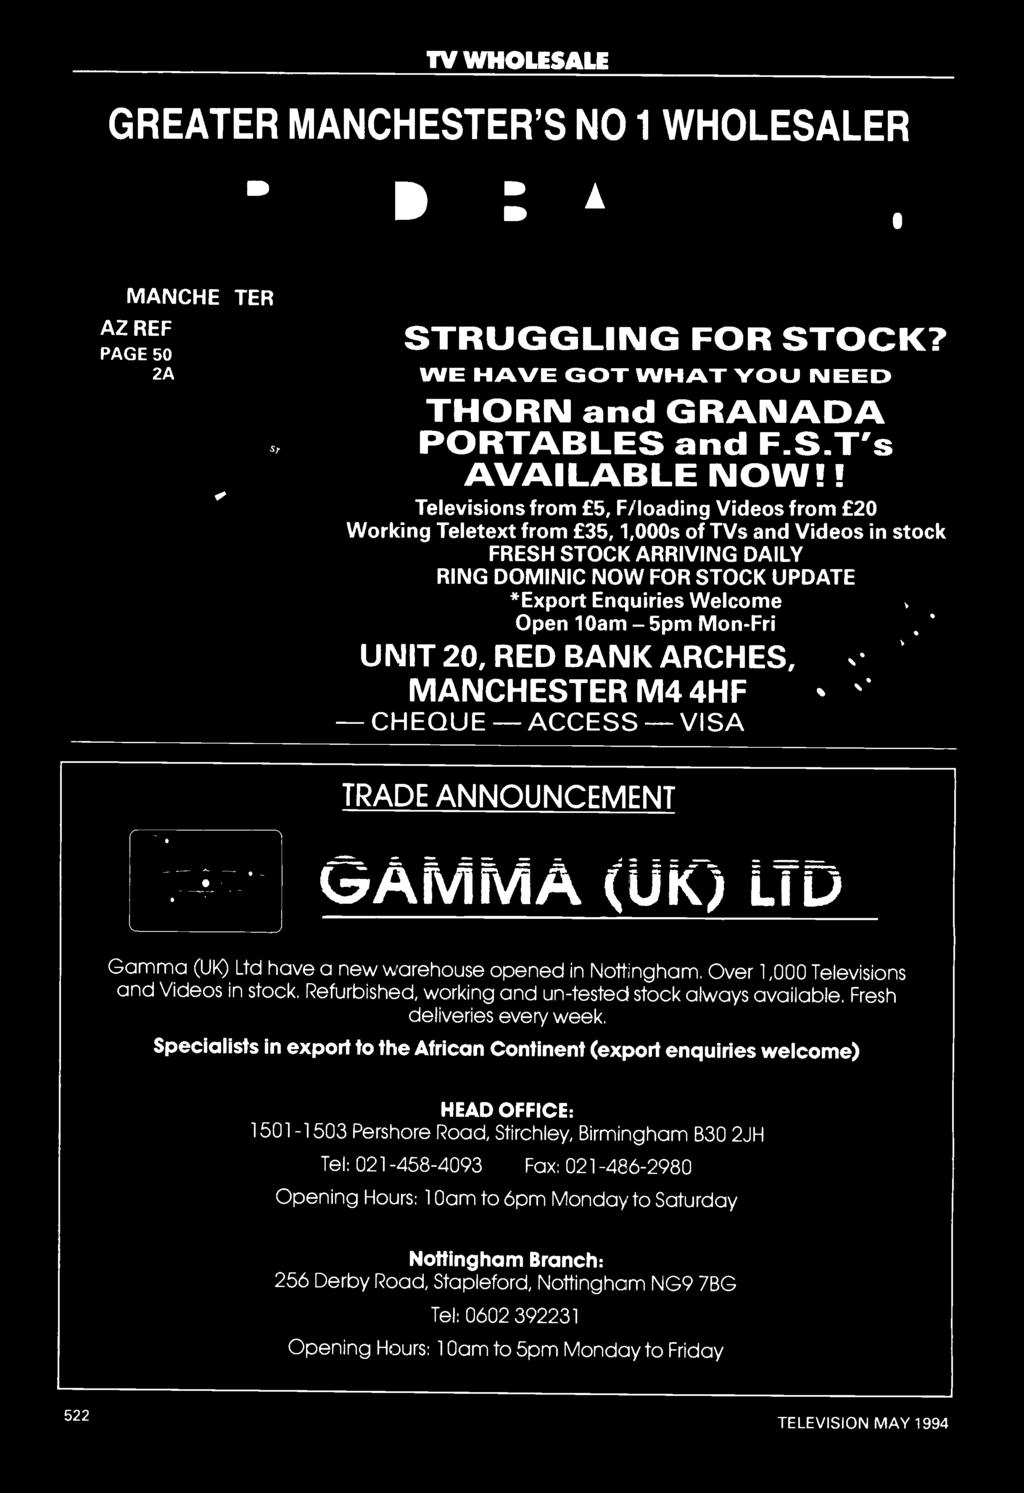 10am - 5pm Mon -Fri UNIT 20, RED BANK ARCHES, MANCHESTER M4 4HF CHEQUE ACCESS VISA TRADE ANNOUNCEMENT ks-7-amivia Gamma (UK) Ltd have a new warehouse opened in Nottngham.